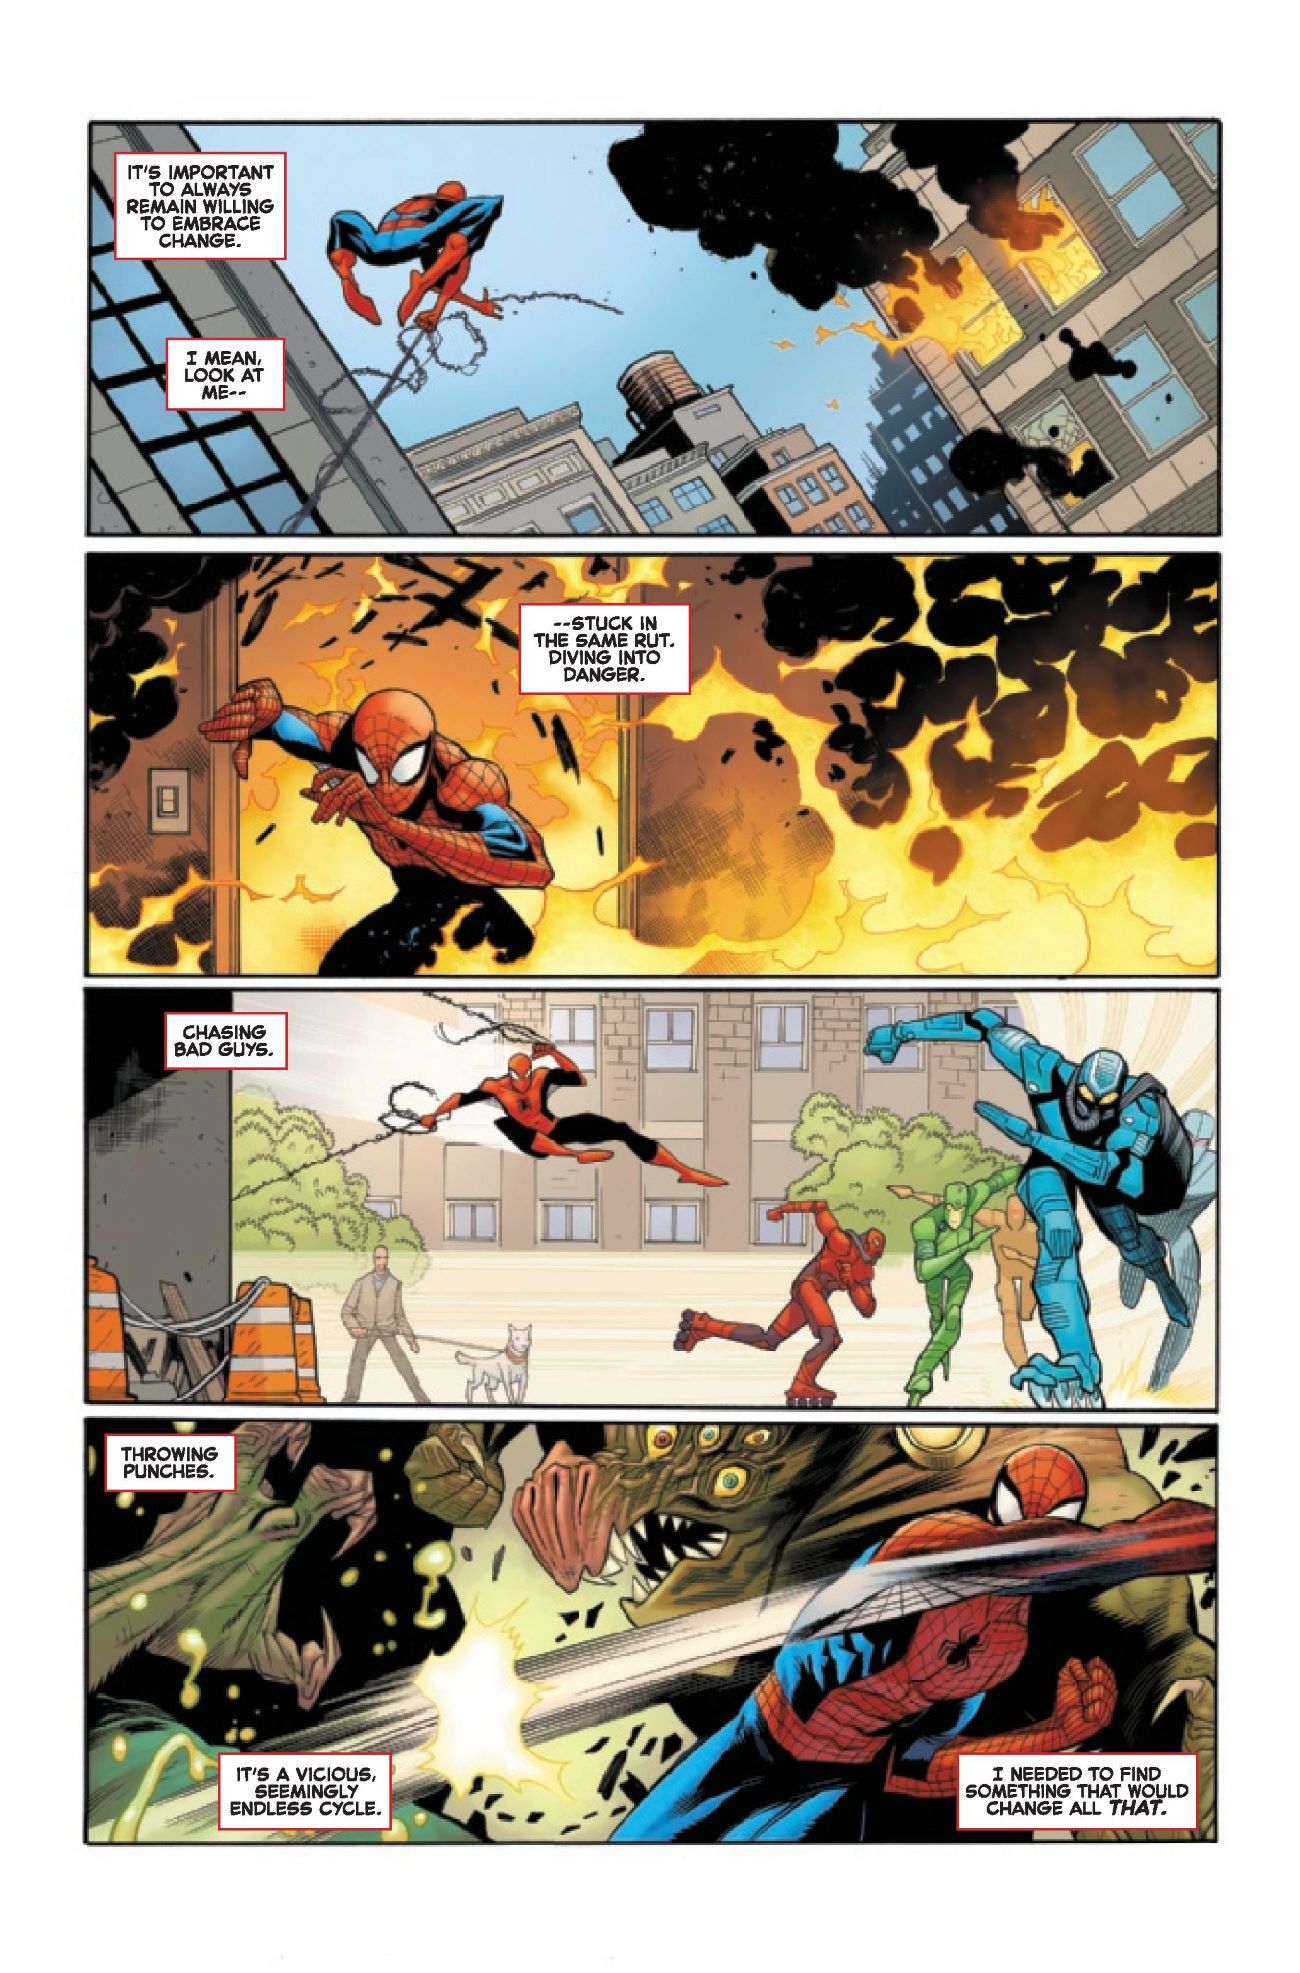 Amazing Spider-Man 37 Comic Preview 1